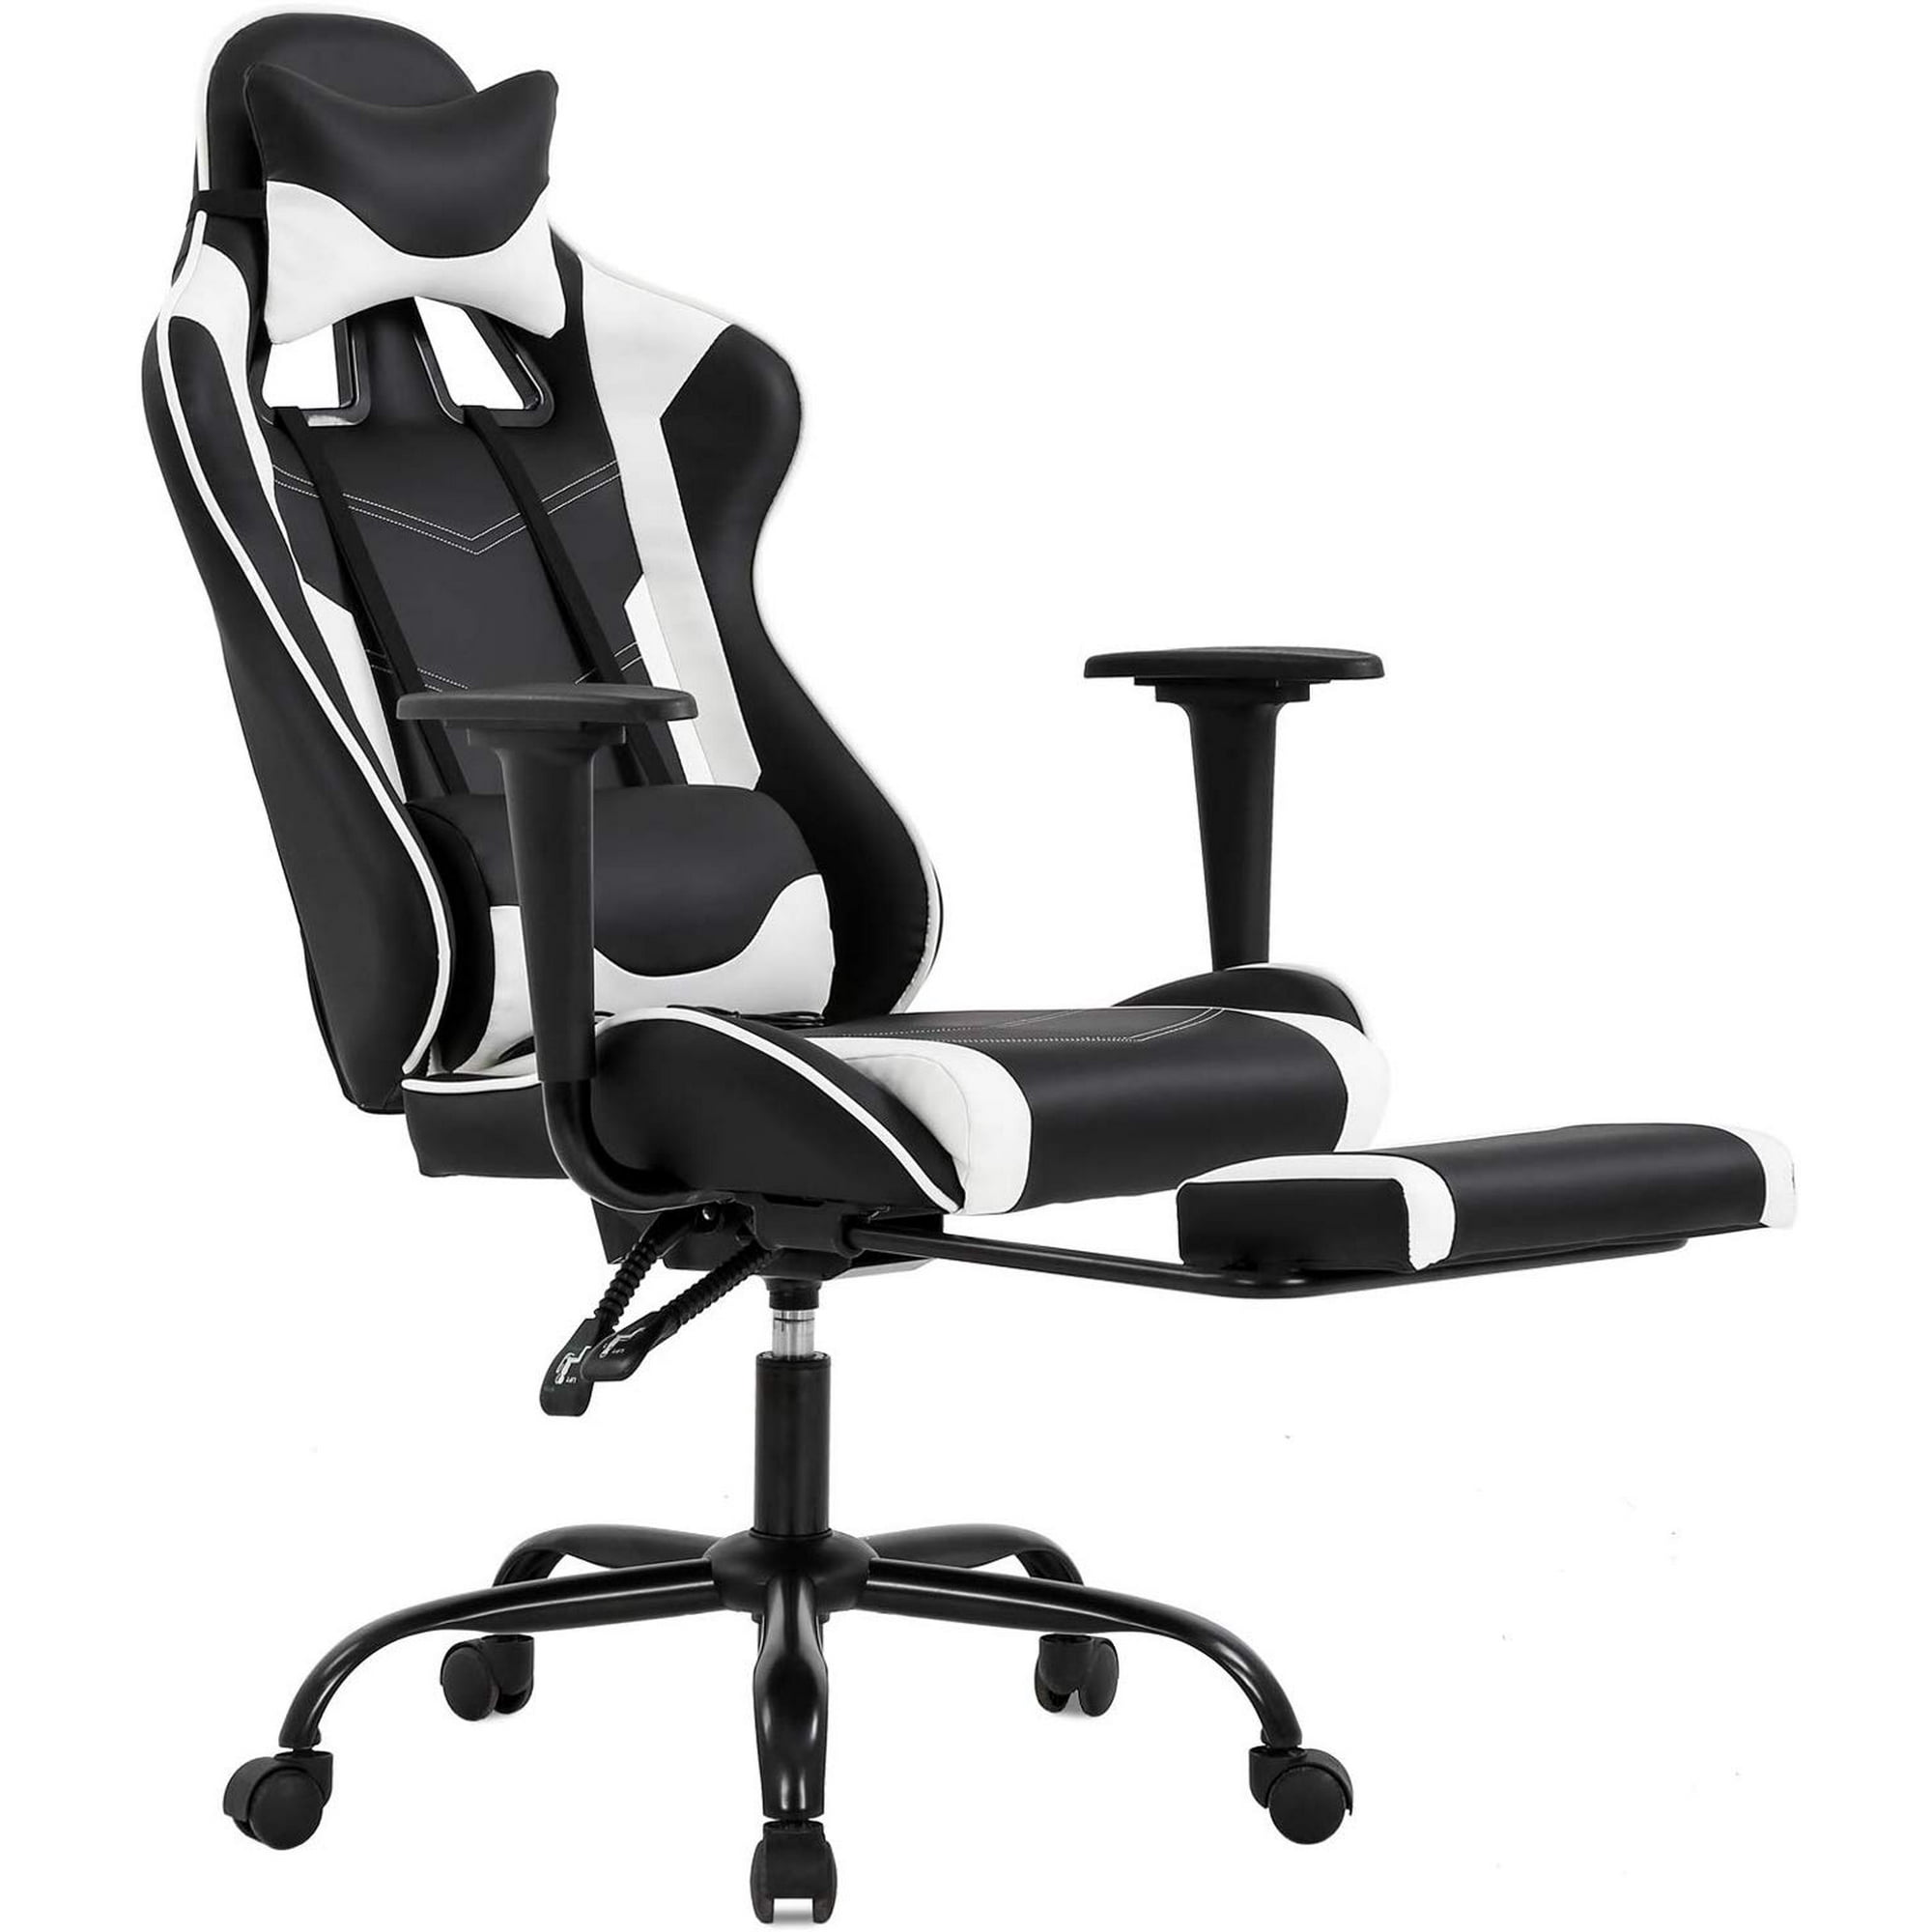 Ergonomic Office Chair Pc Gaming Chair Desk Chair Executive Pu Leather Computer Chair Lumbar Support With Footrest Modern Task Rolling Swivel Chair For Adults White Walmart Canada